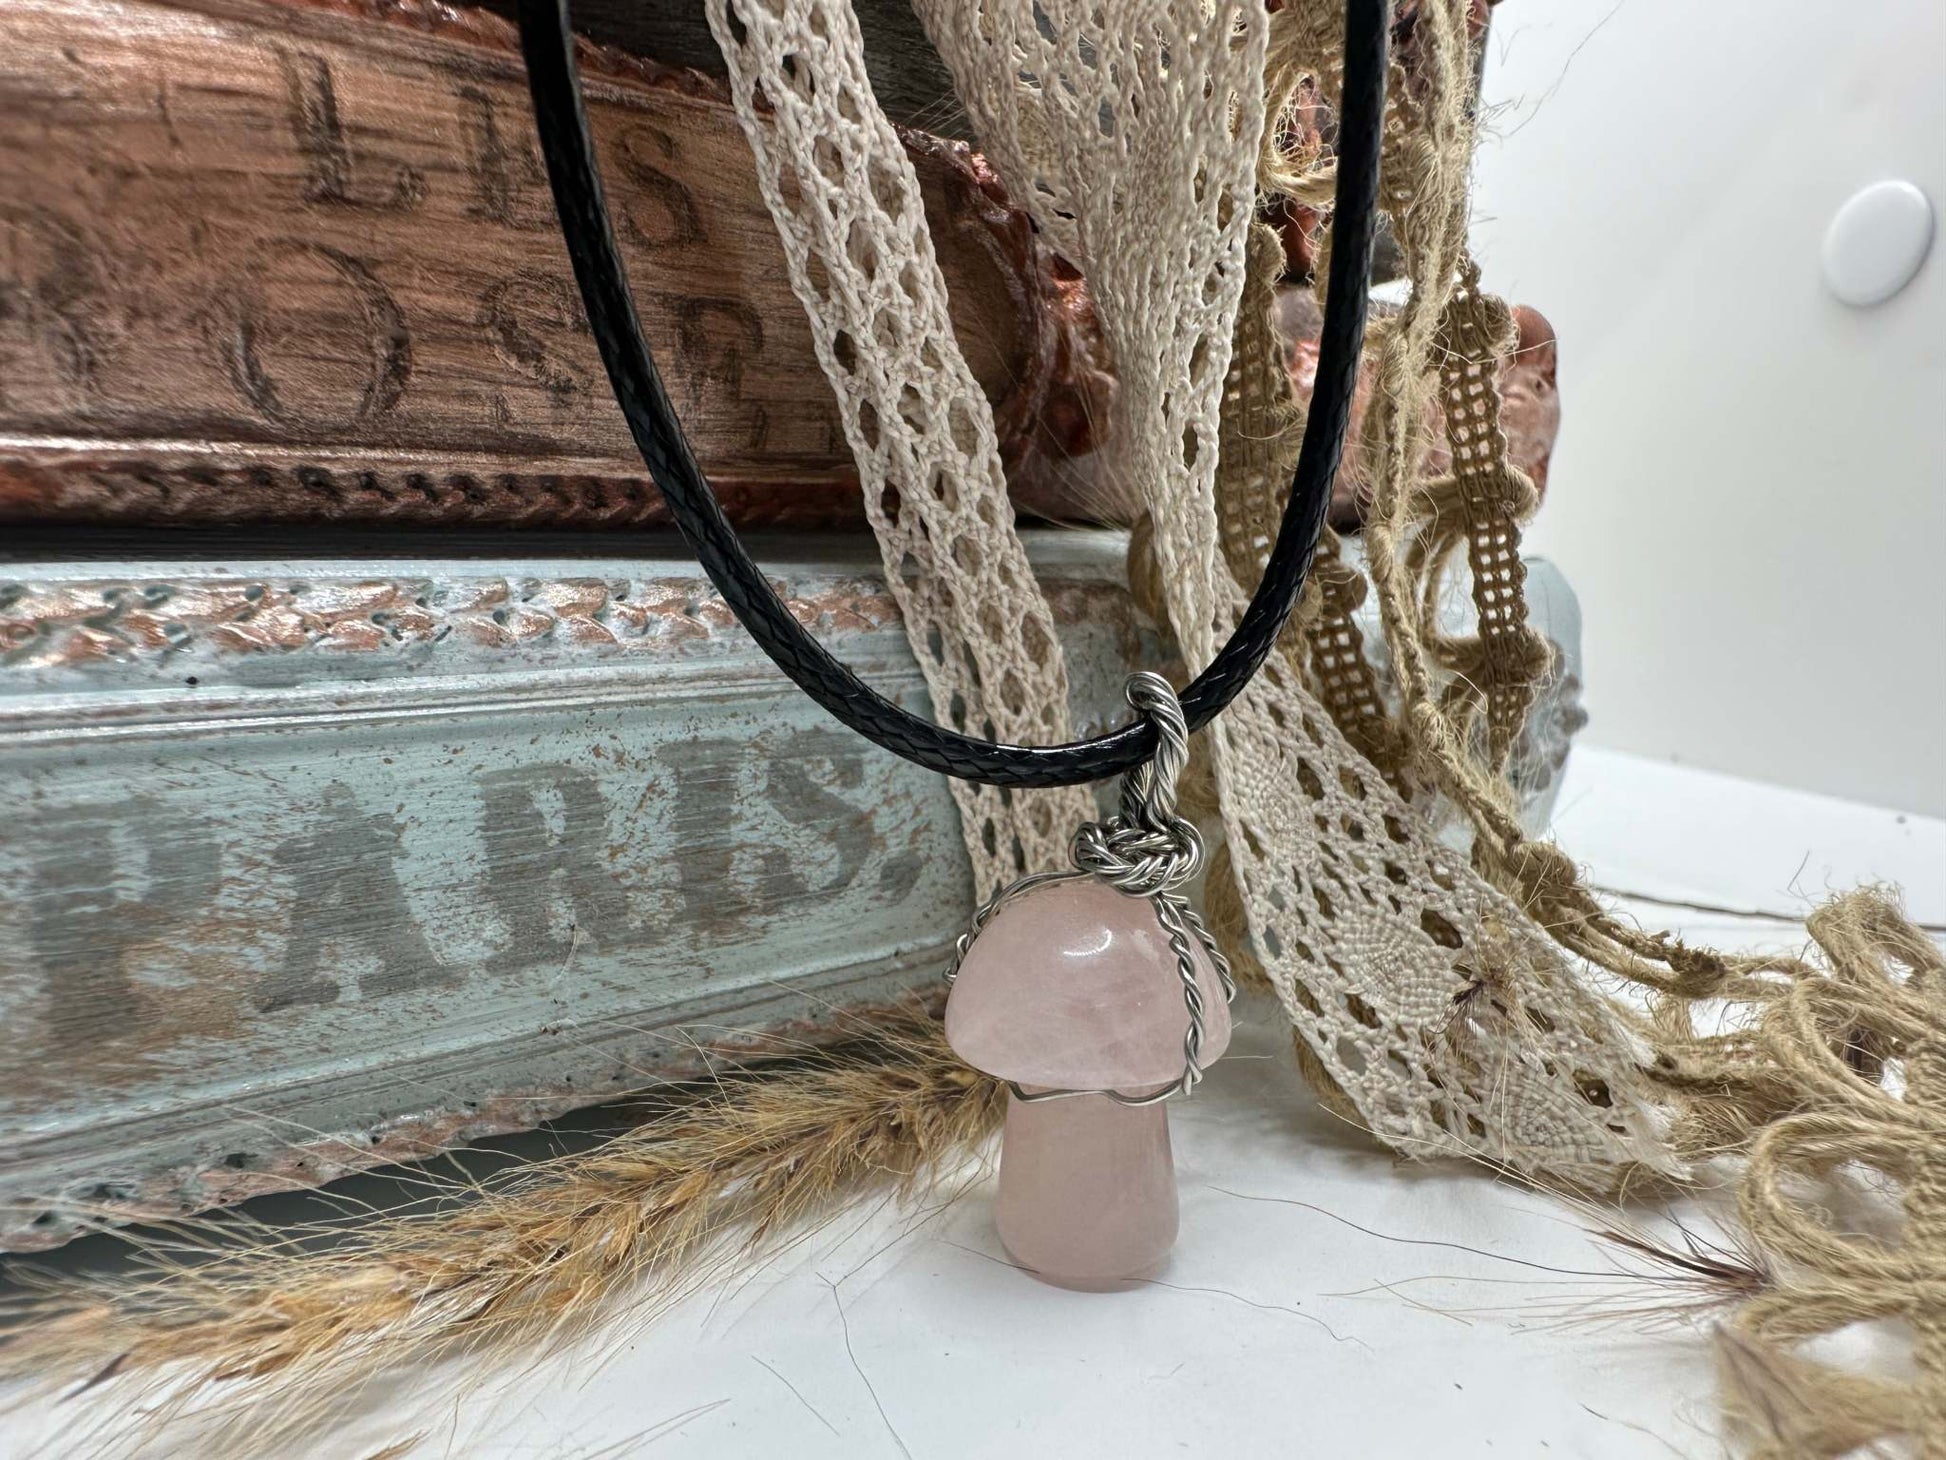 A Rose Quartz Mushroom Shaped Gemstone Necklace hangs from a black leather cord